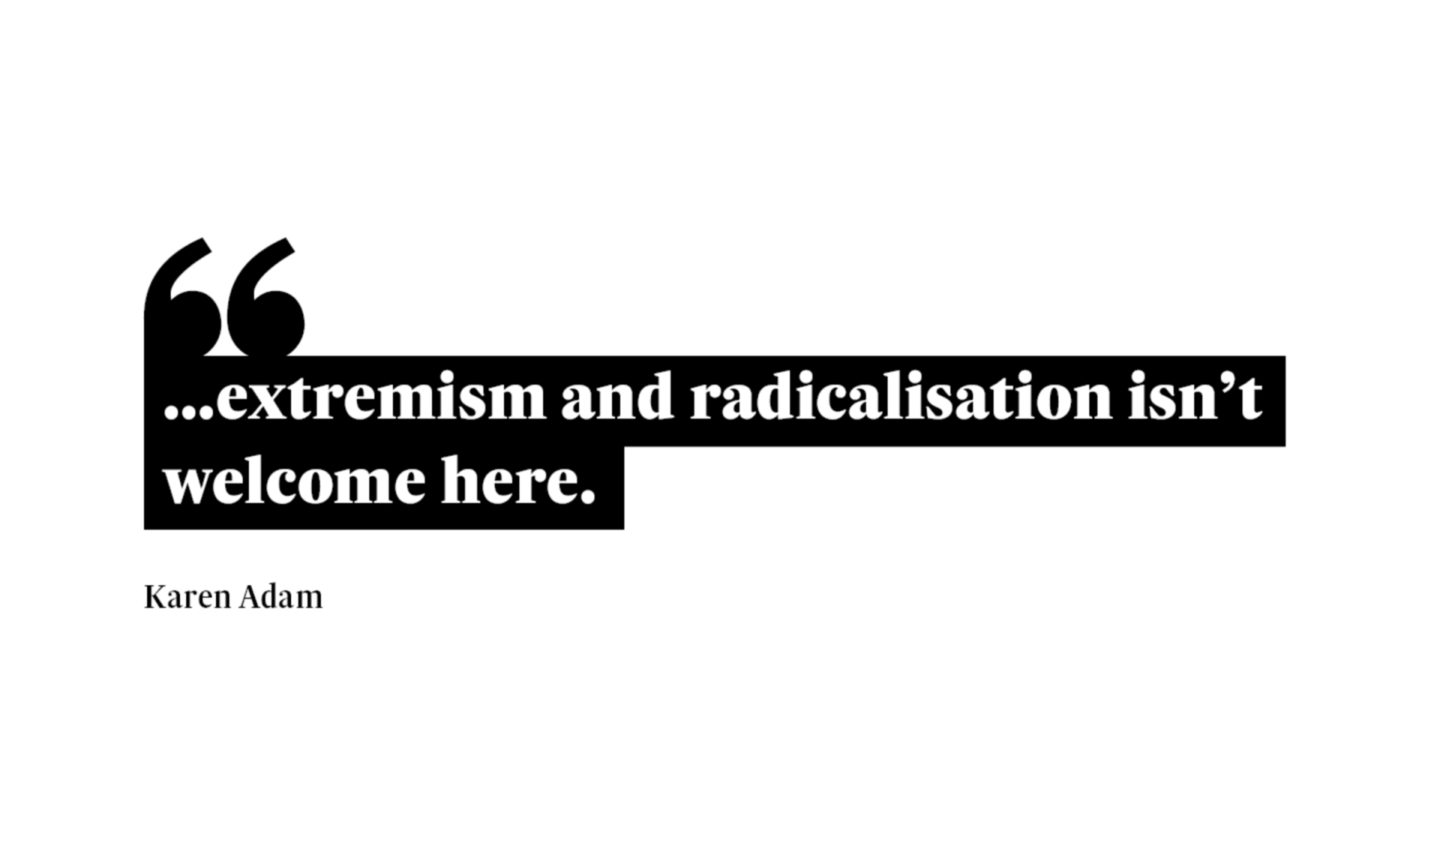 A graphic with the words: "...extremism and radicalisation isn't welcome here." A quote from Karen Adam.